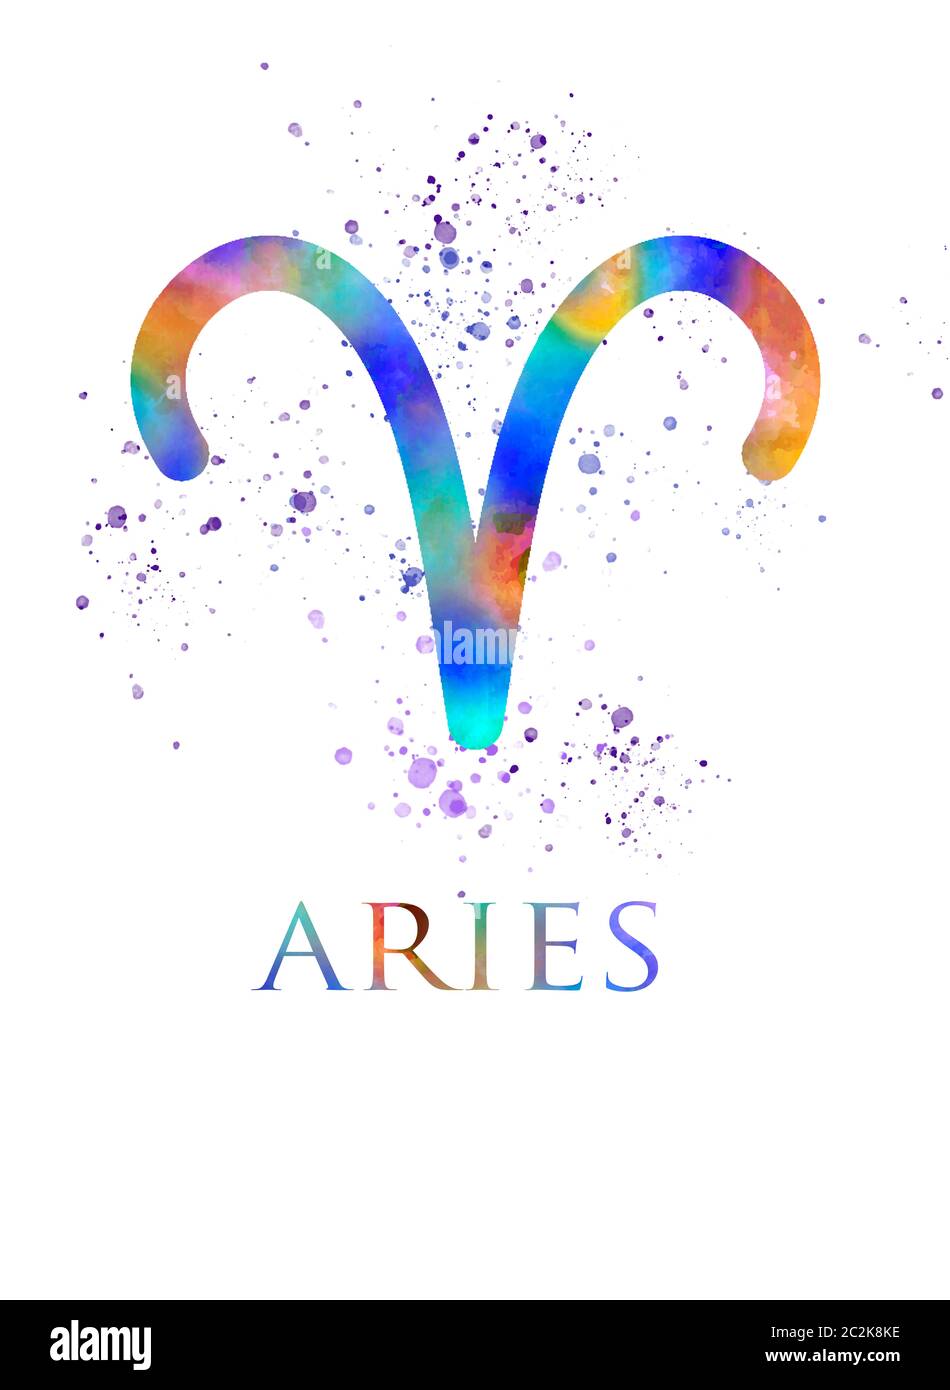 Aries Zodiac Sign High Resolution Stock Photography and Images - Alamy